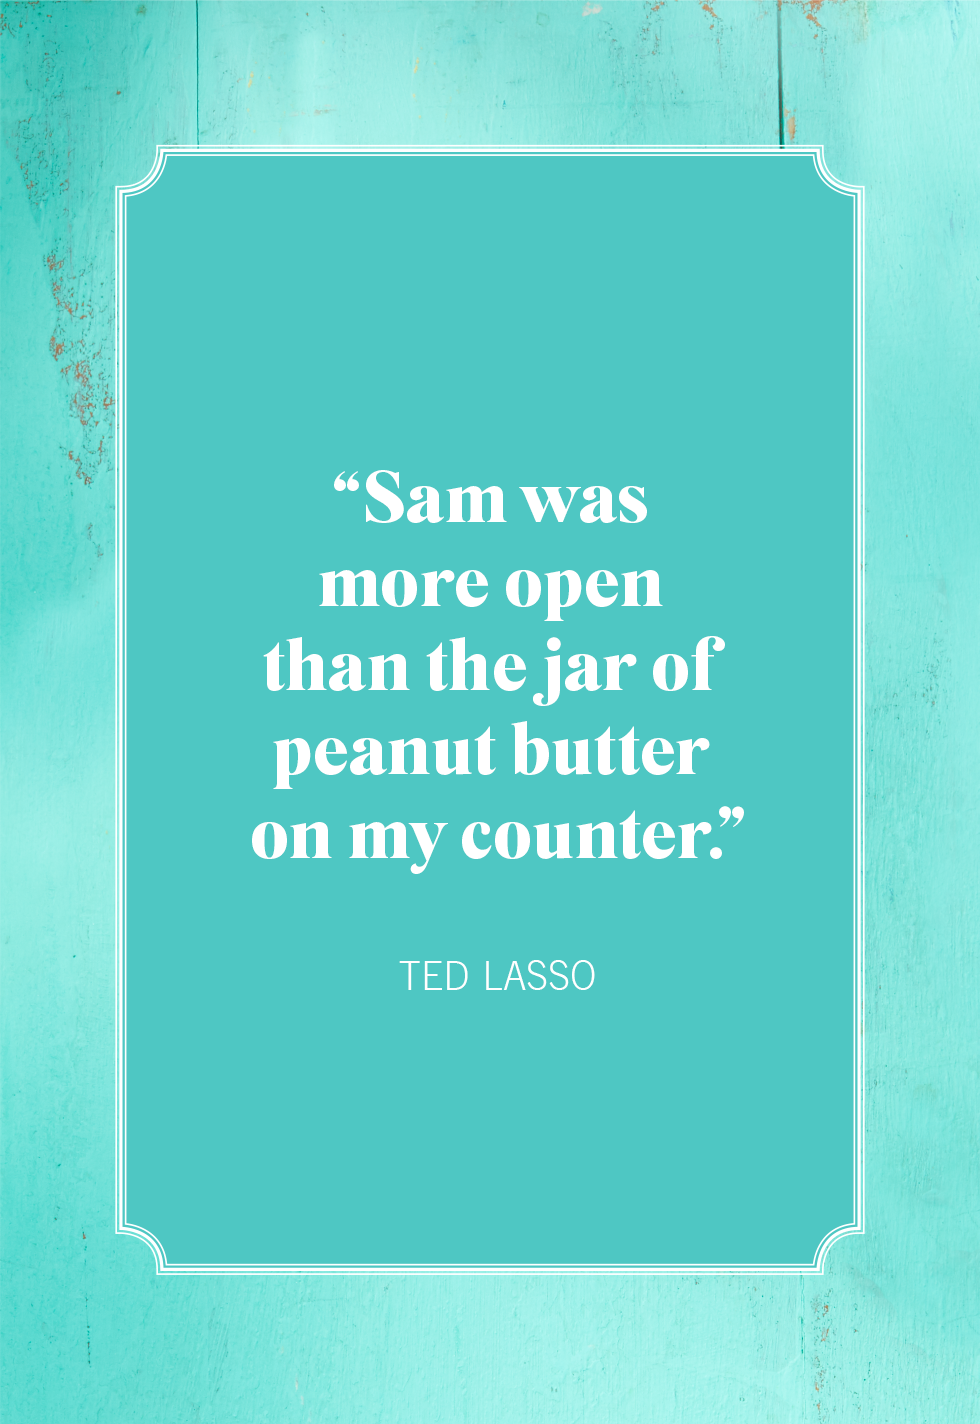 Funny and Heart-Warming Ted Lasso Quotes from the Best Comedy on TV